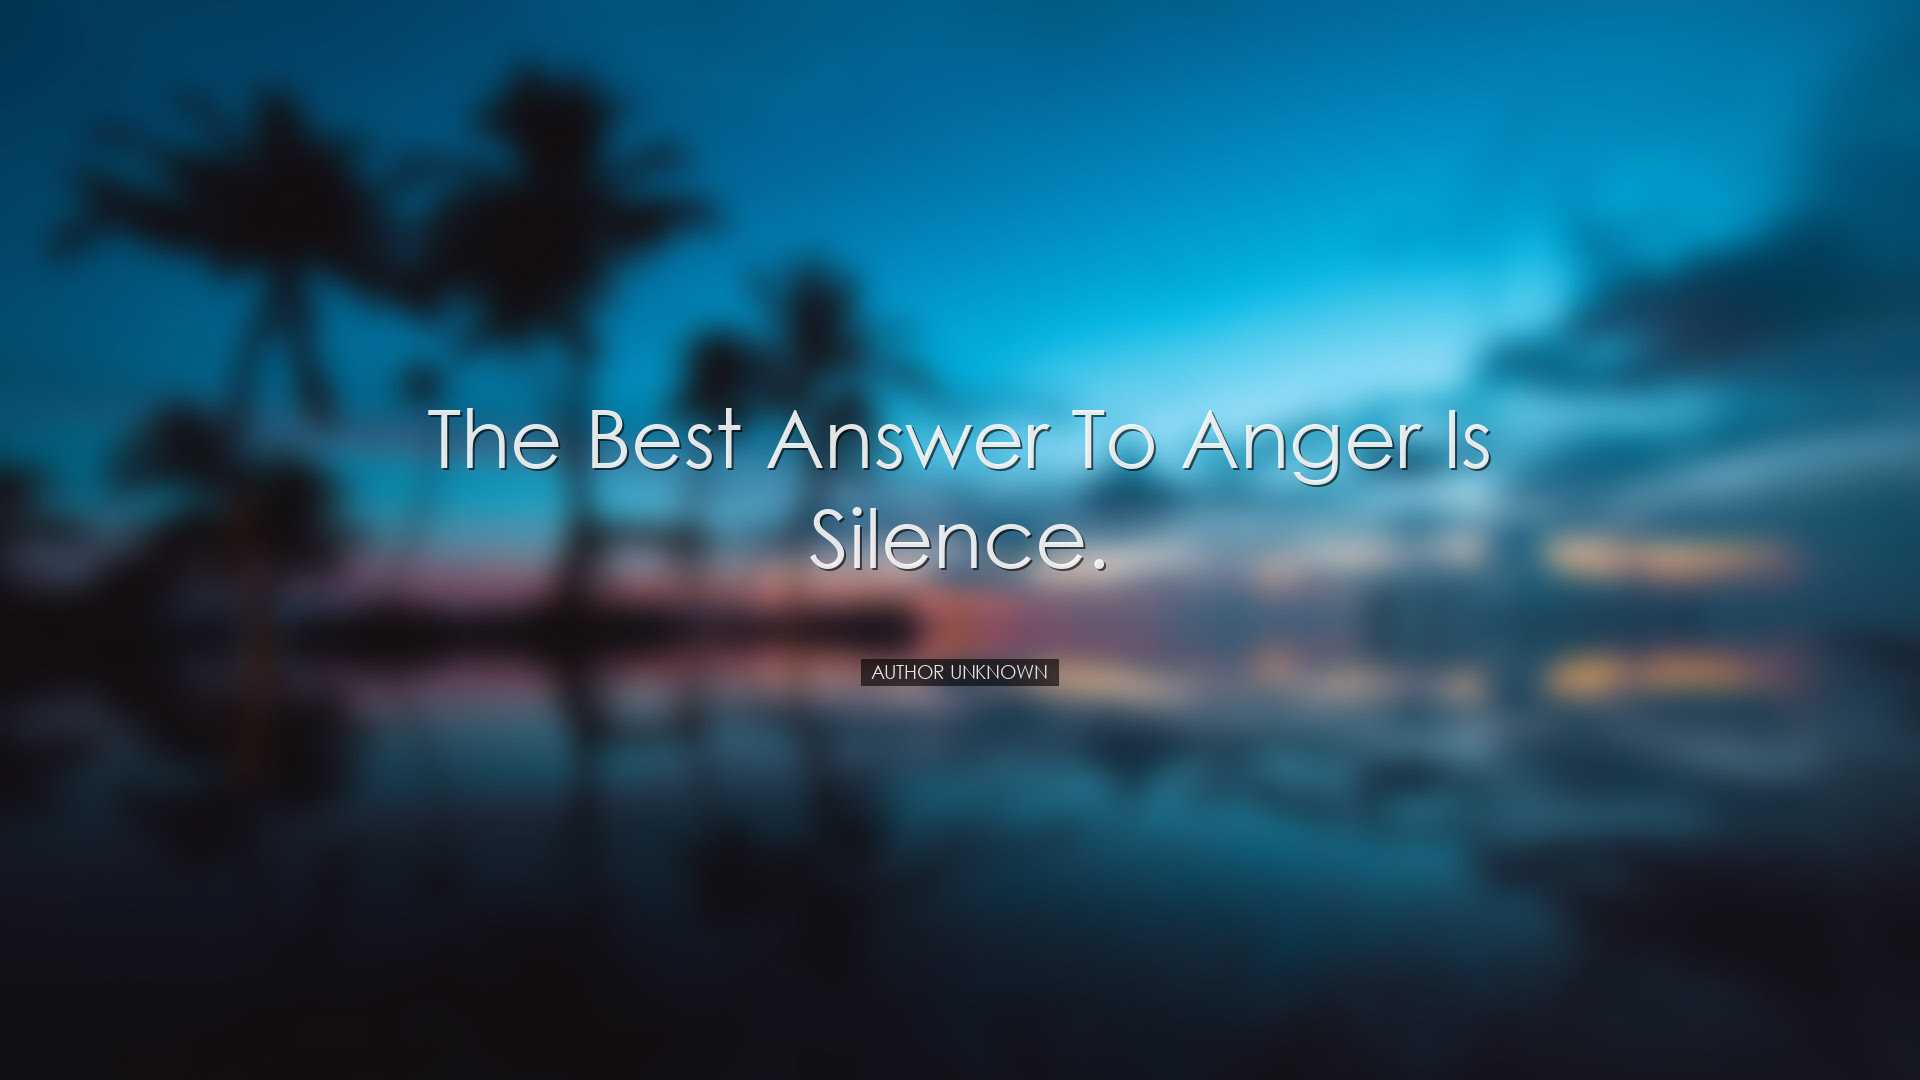 The best answer to anger is silence. - Author Unknown